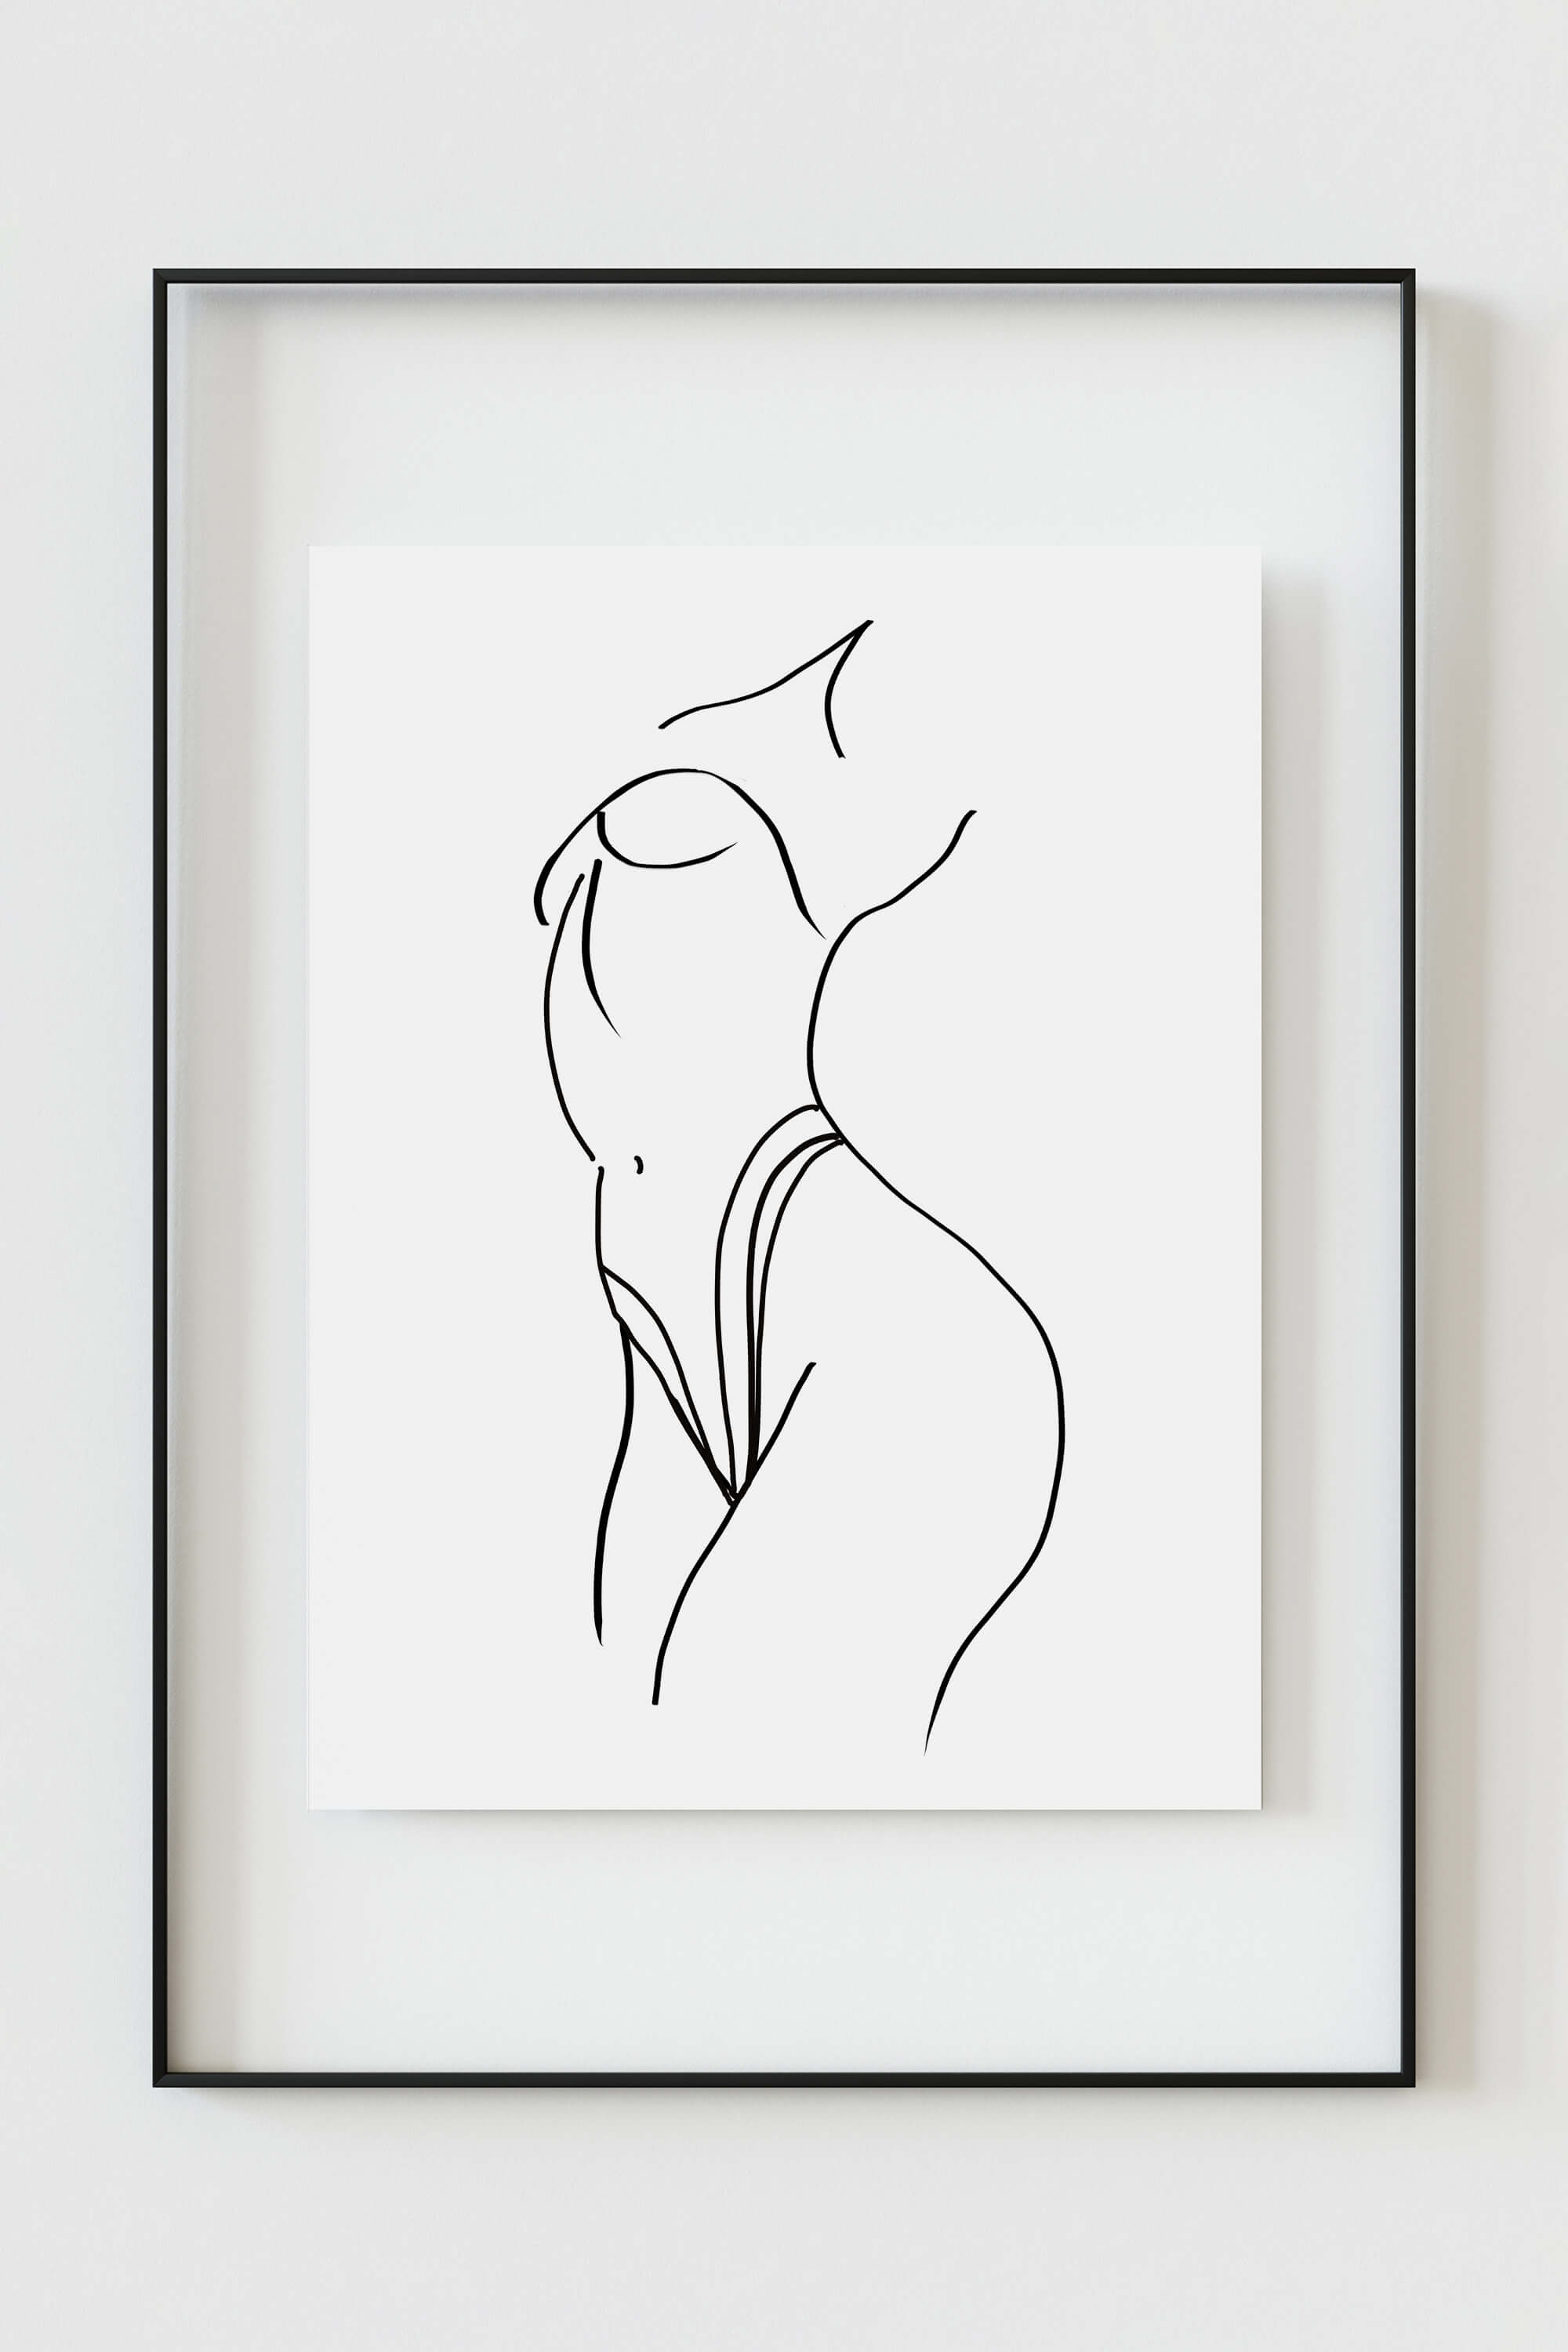 Monochrome wall art featuring an elegant female figure drawing. The timeless beauty of the artwork seamlessly integrates into various living spaces. Elevate your decor with this sophisticated and versatile art print.